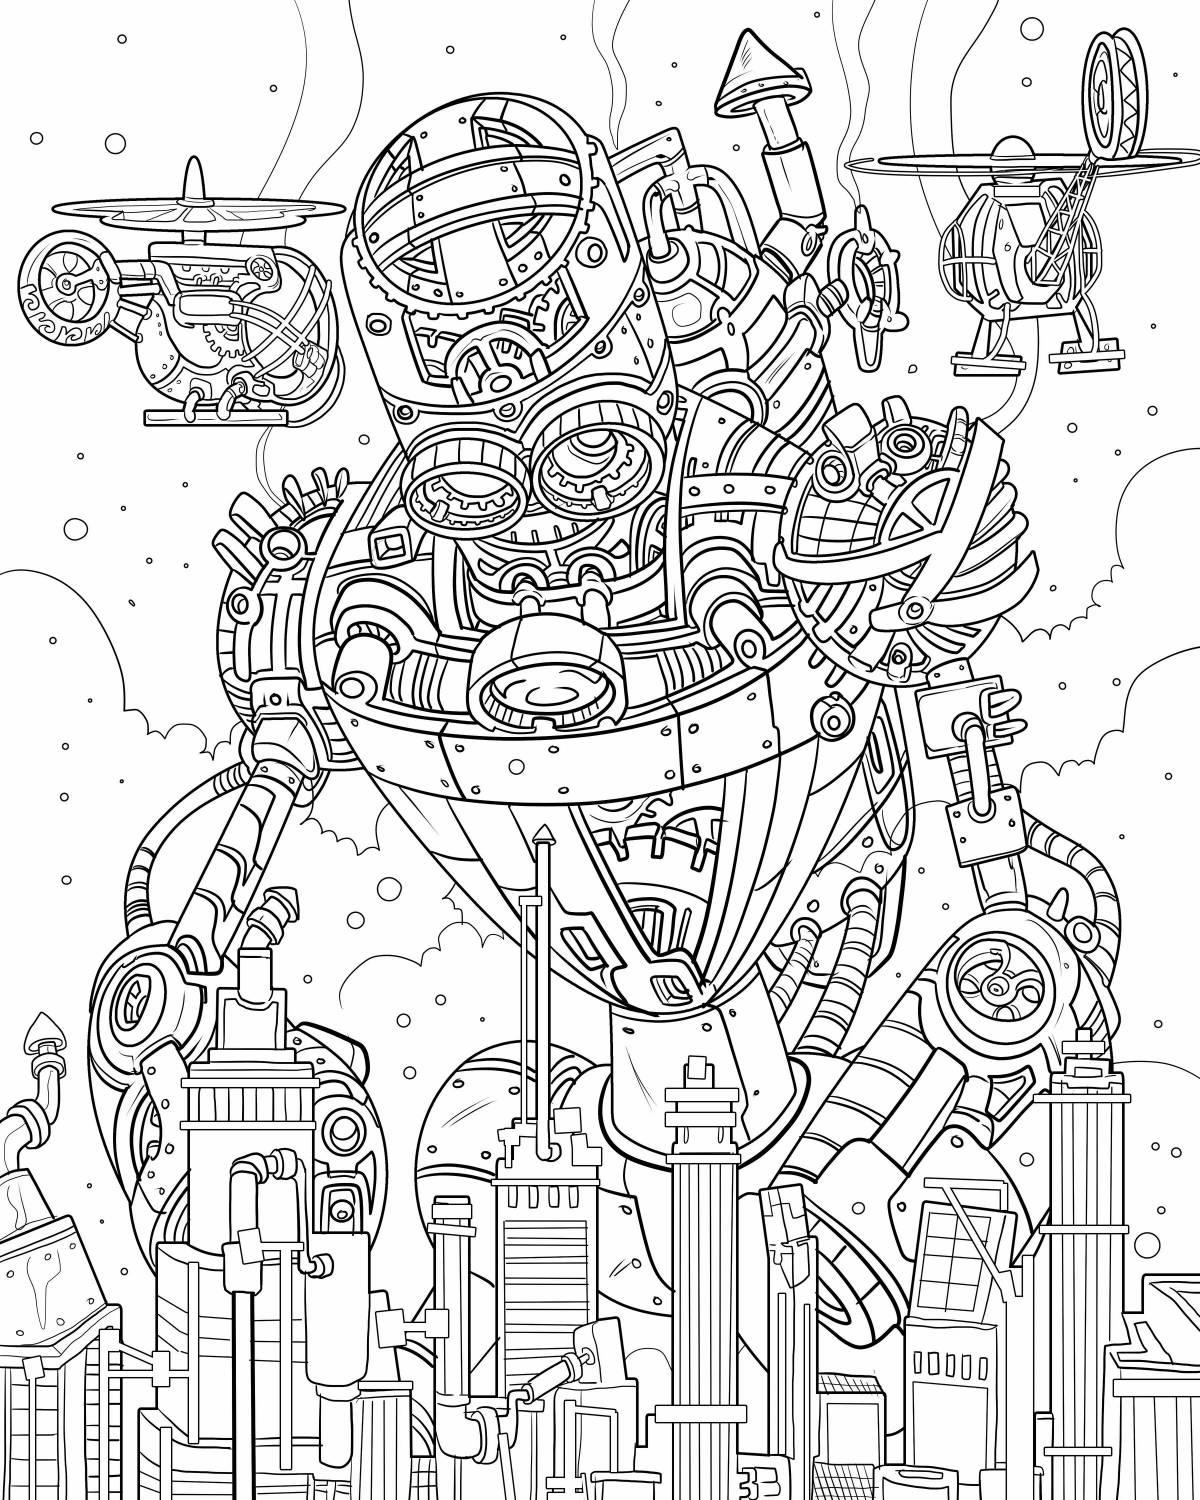 Steampunk live coloring book